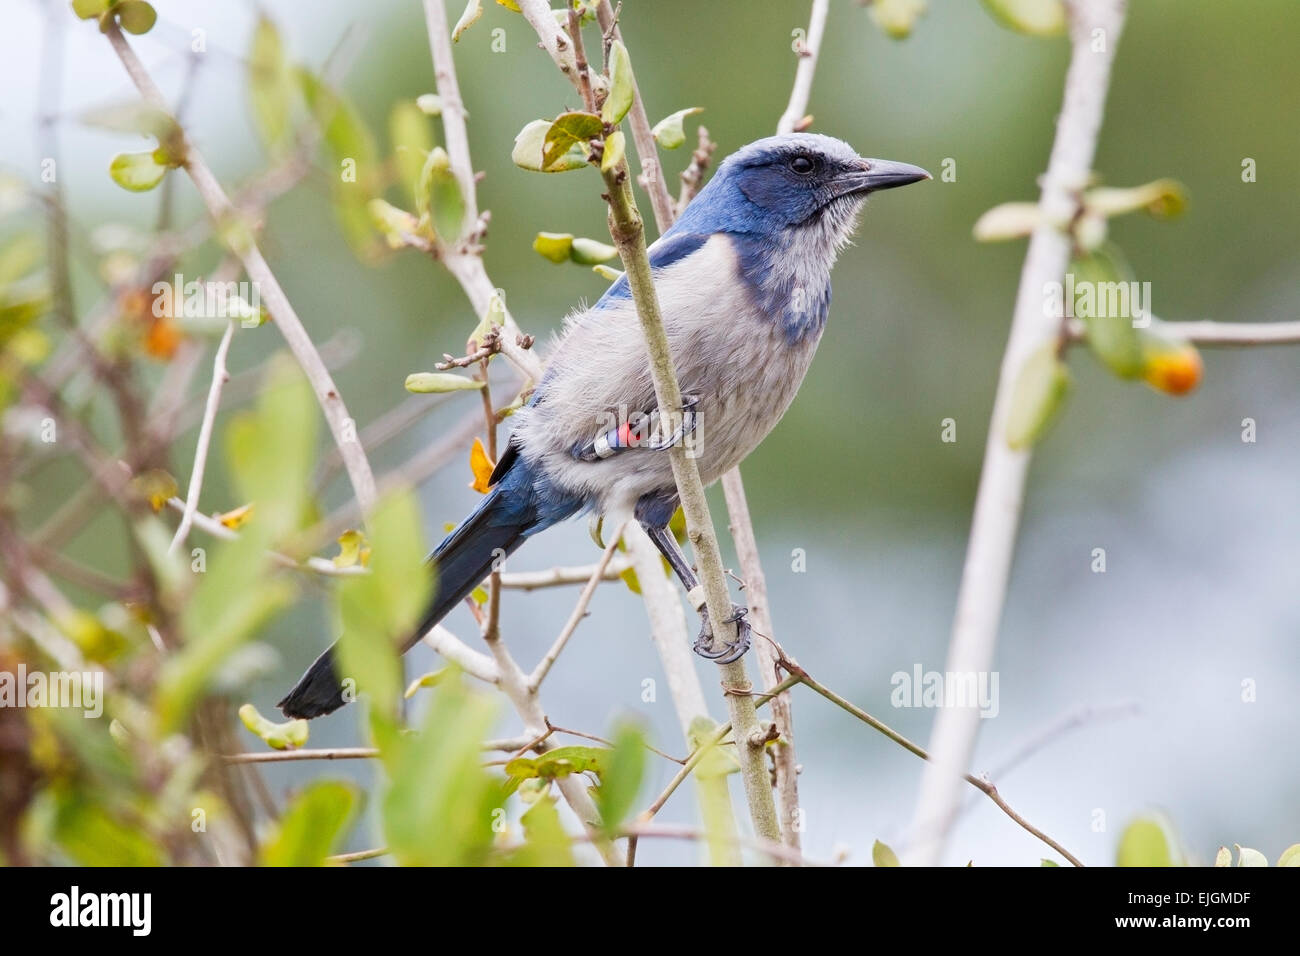 Florida Scrub Jay (Aphelocoma coerulescens) adult wearing scientific bands, perched in vegetation, Florida, USA Stock Photo